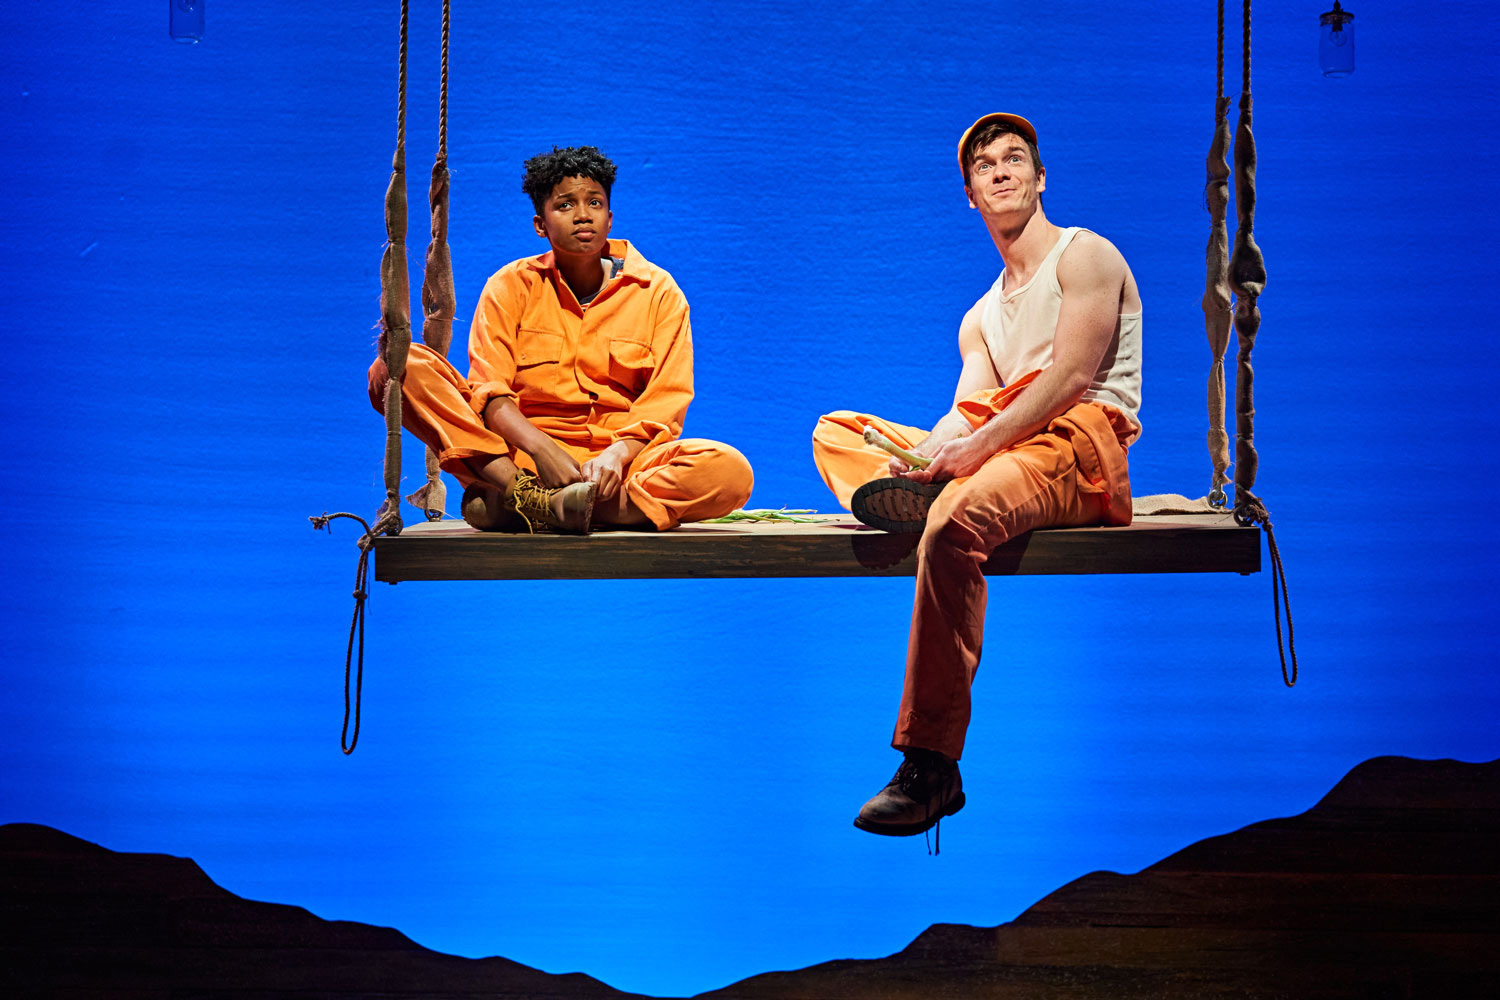 Holes will tour venues across the UK until 30 May 2020 (photo: Manuel Harlan)